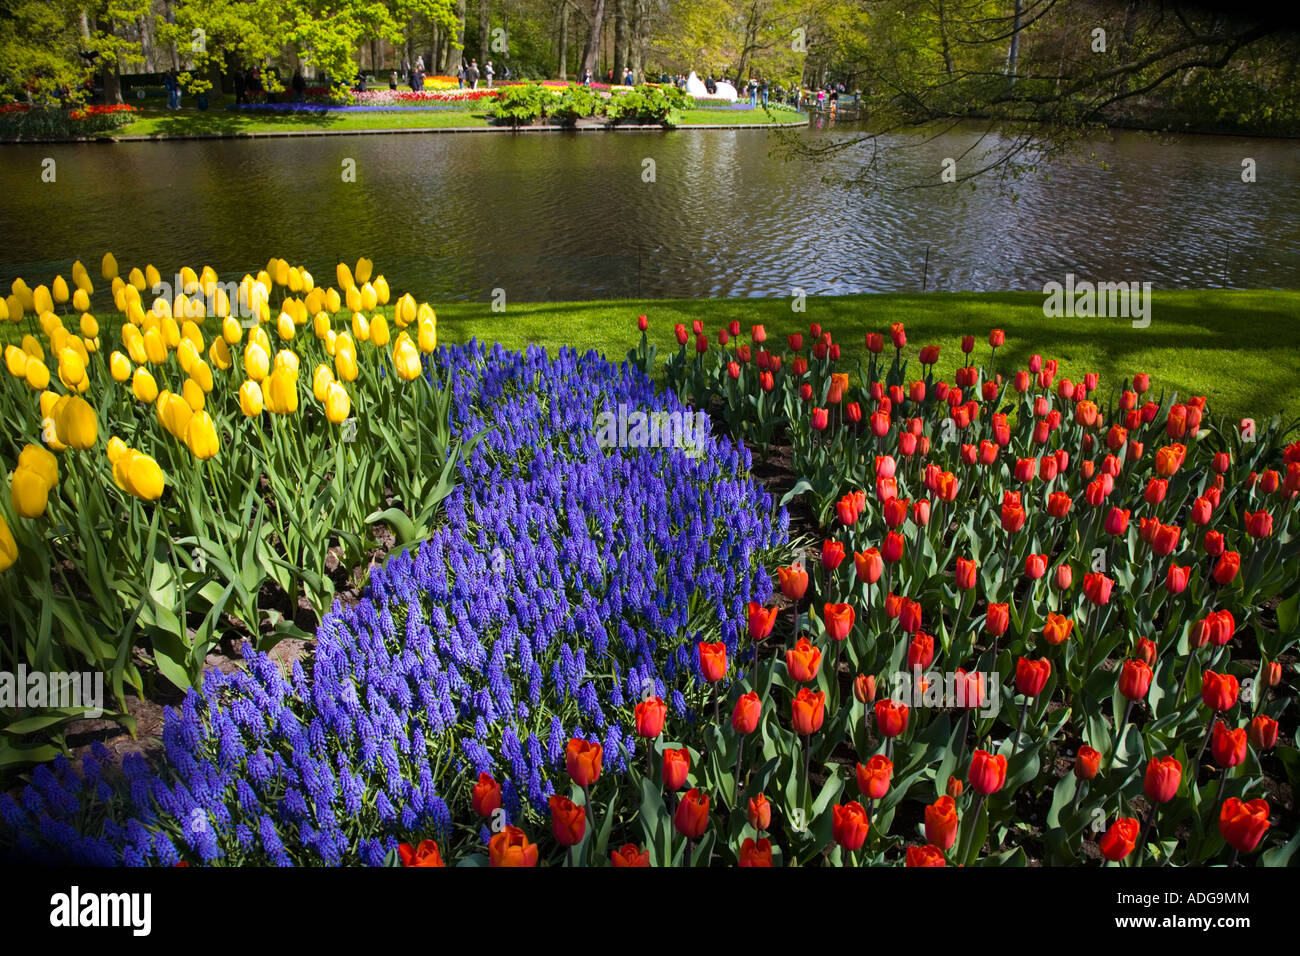 The Lake at Keukenhof Gardens in Lisse, Holland;Netherlands with tulips in bloom Stock Photo